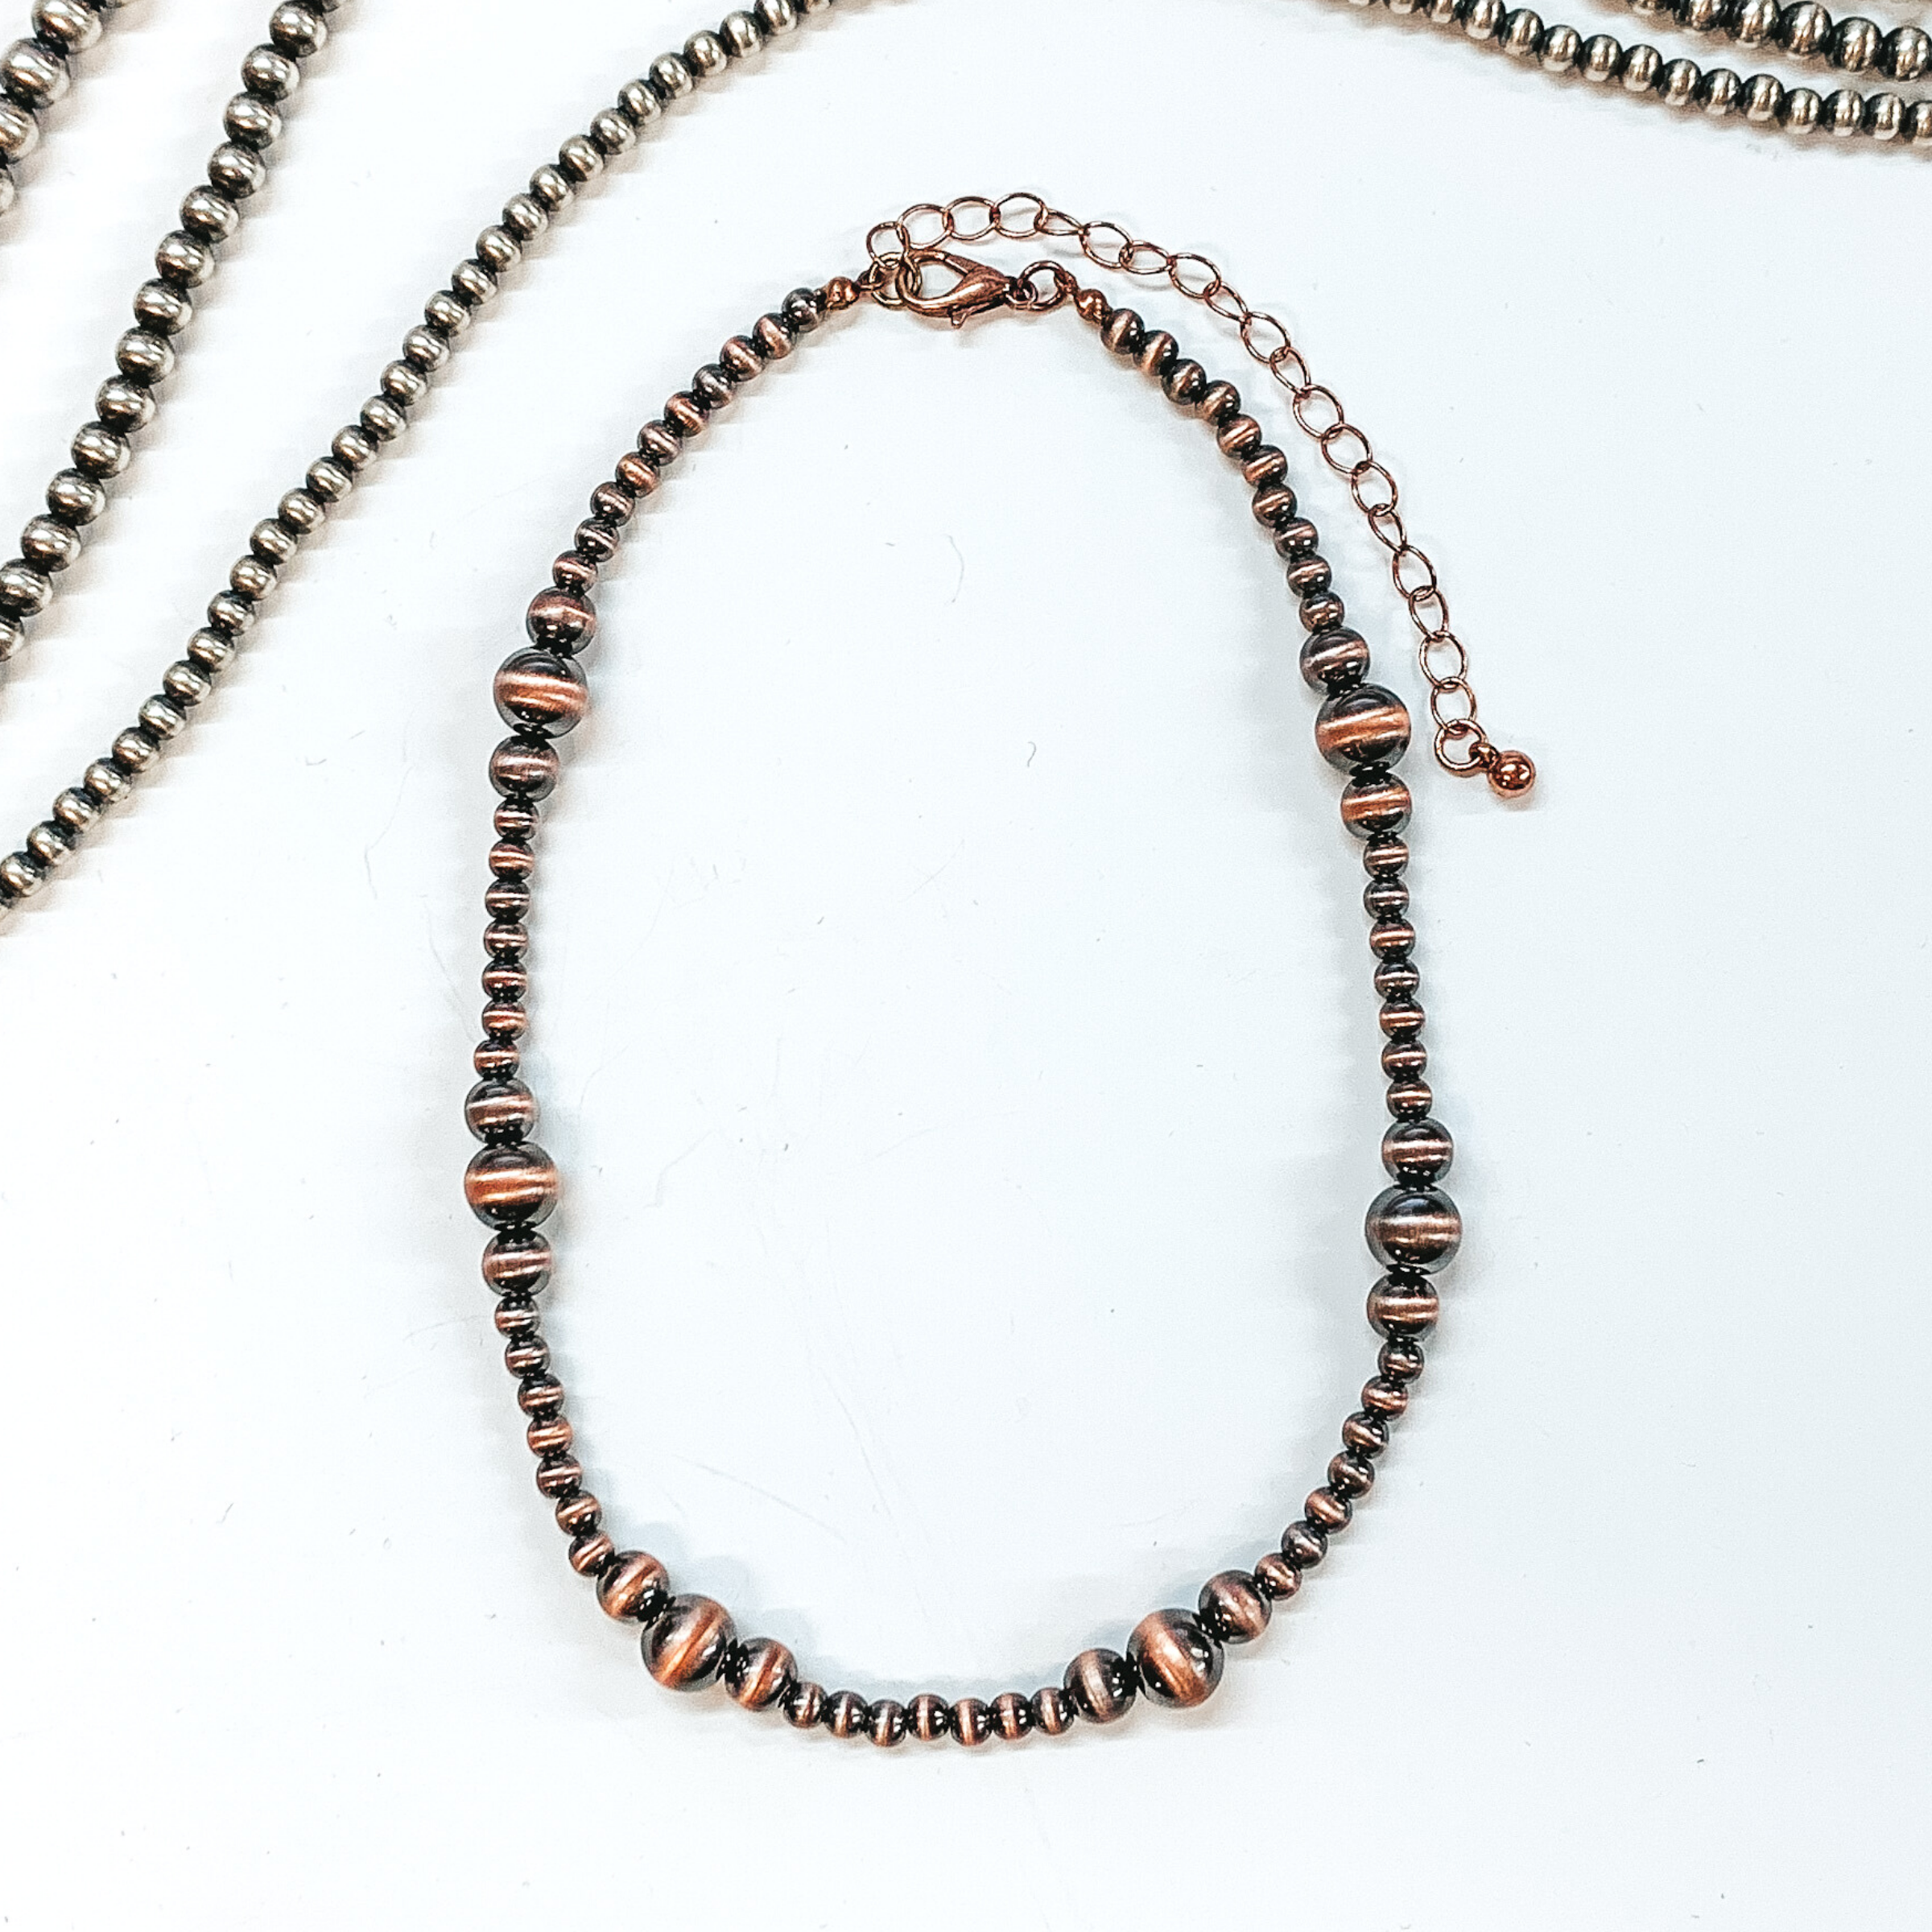 Copper colored bead necklace with larger bead spacers throughout. This necklace is pictured on a white background with silver beads at the top of the picture. 